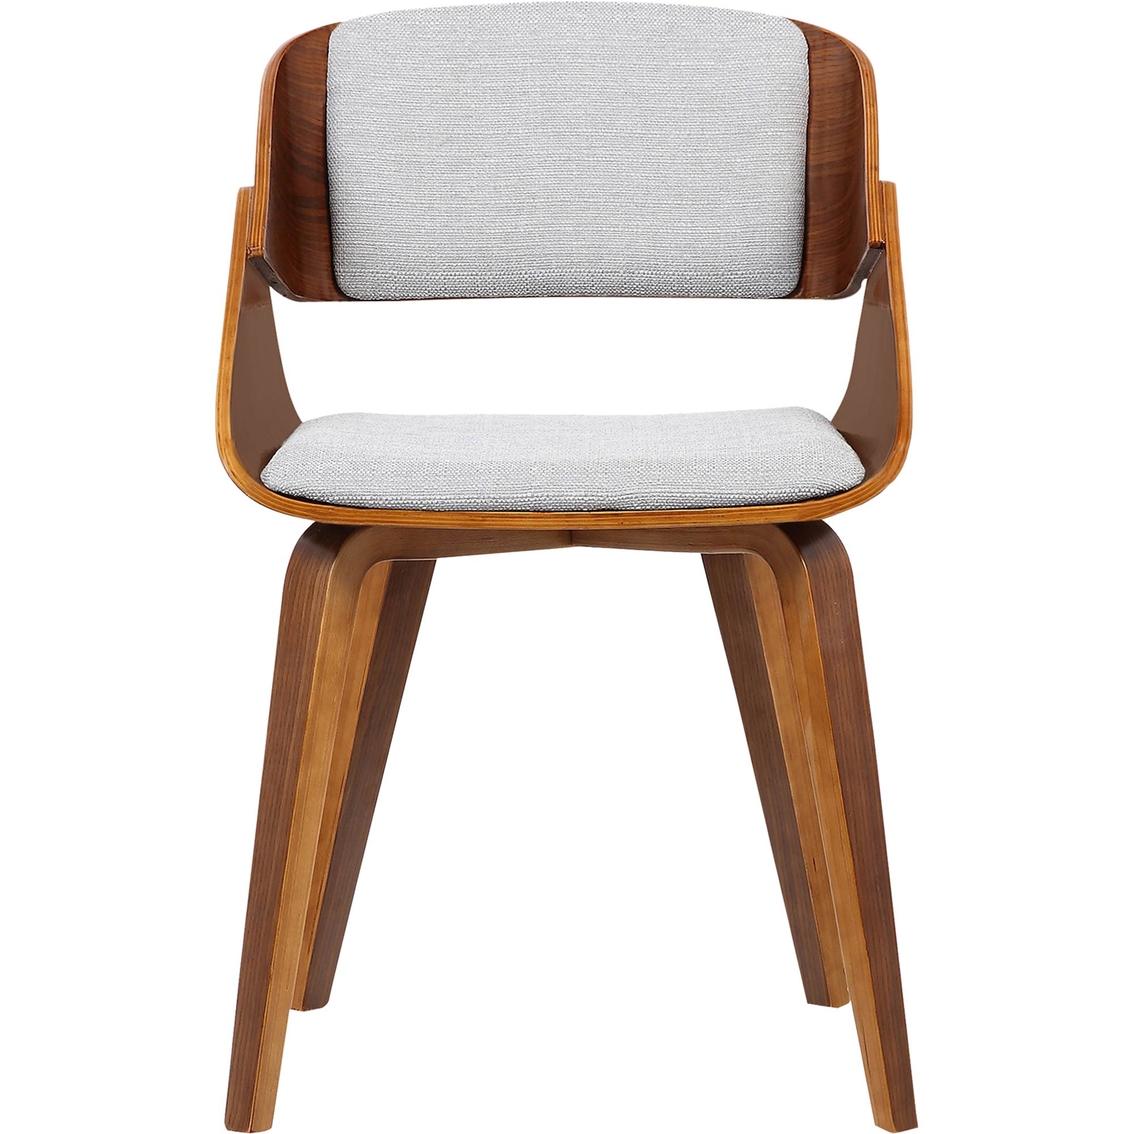 Armen Living Ivy Mid-Century Dining Chair - Image 2 of 4